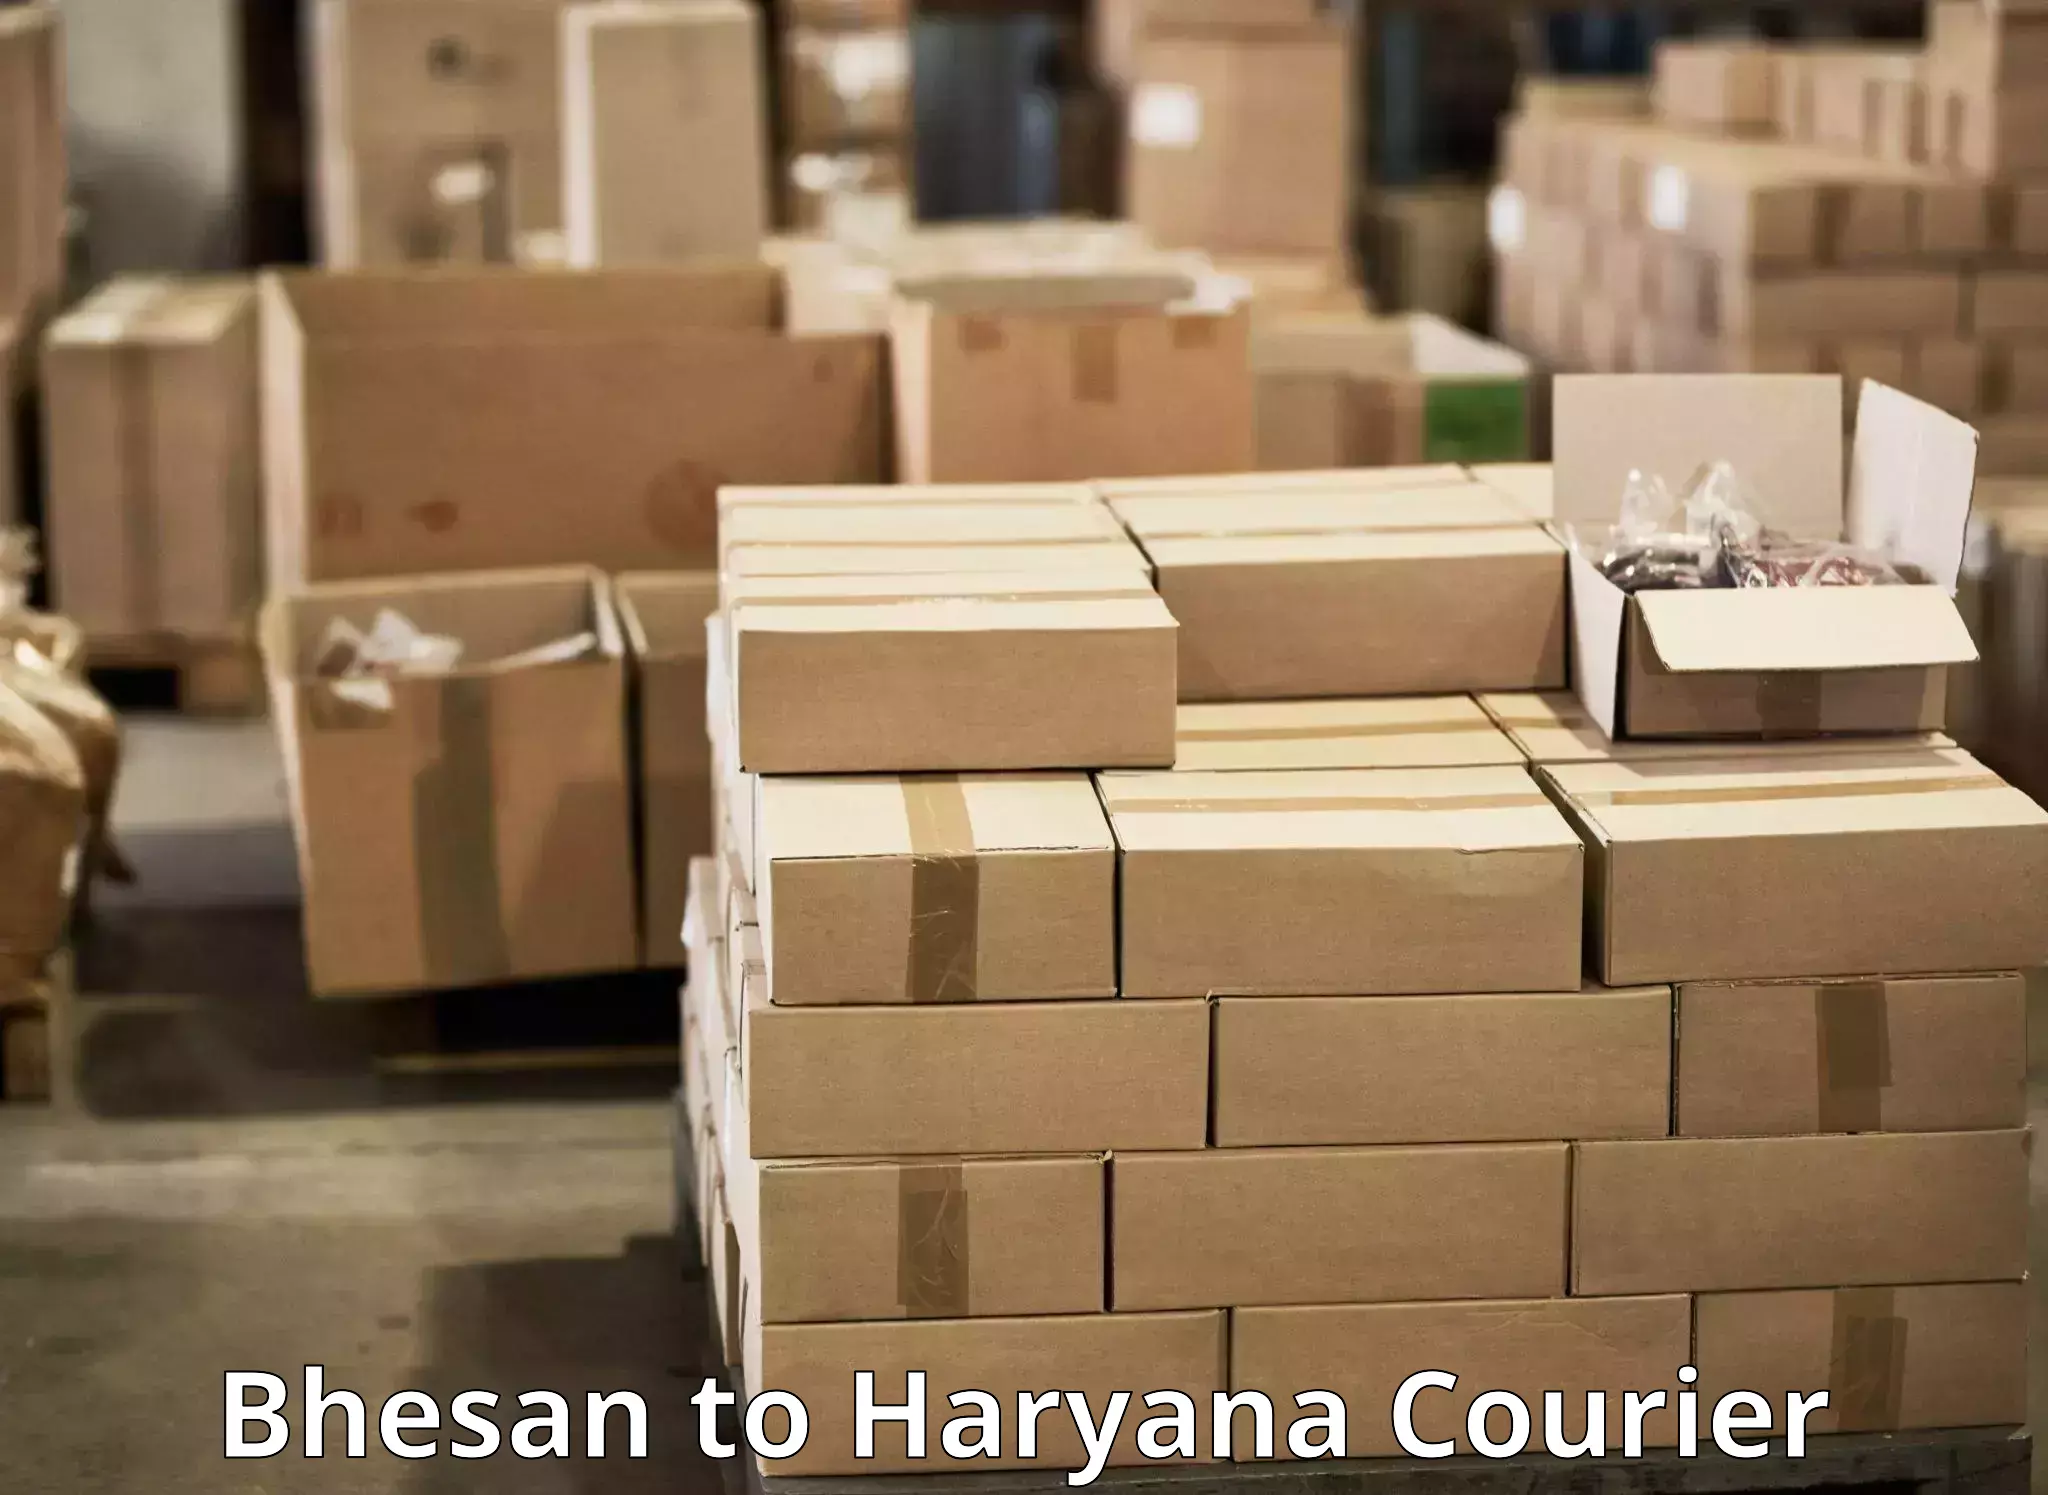 Flexible delivery scheduling Bhesan to Chaudhary Charan Singh Haryana Agricultural University Hisar